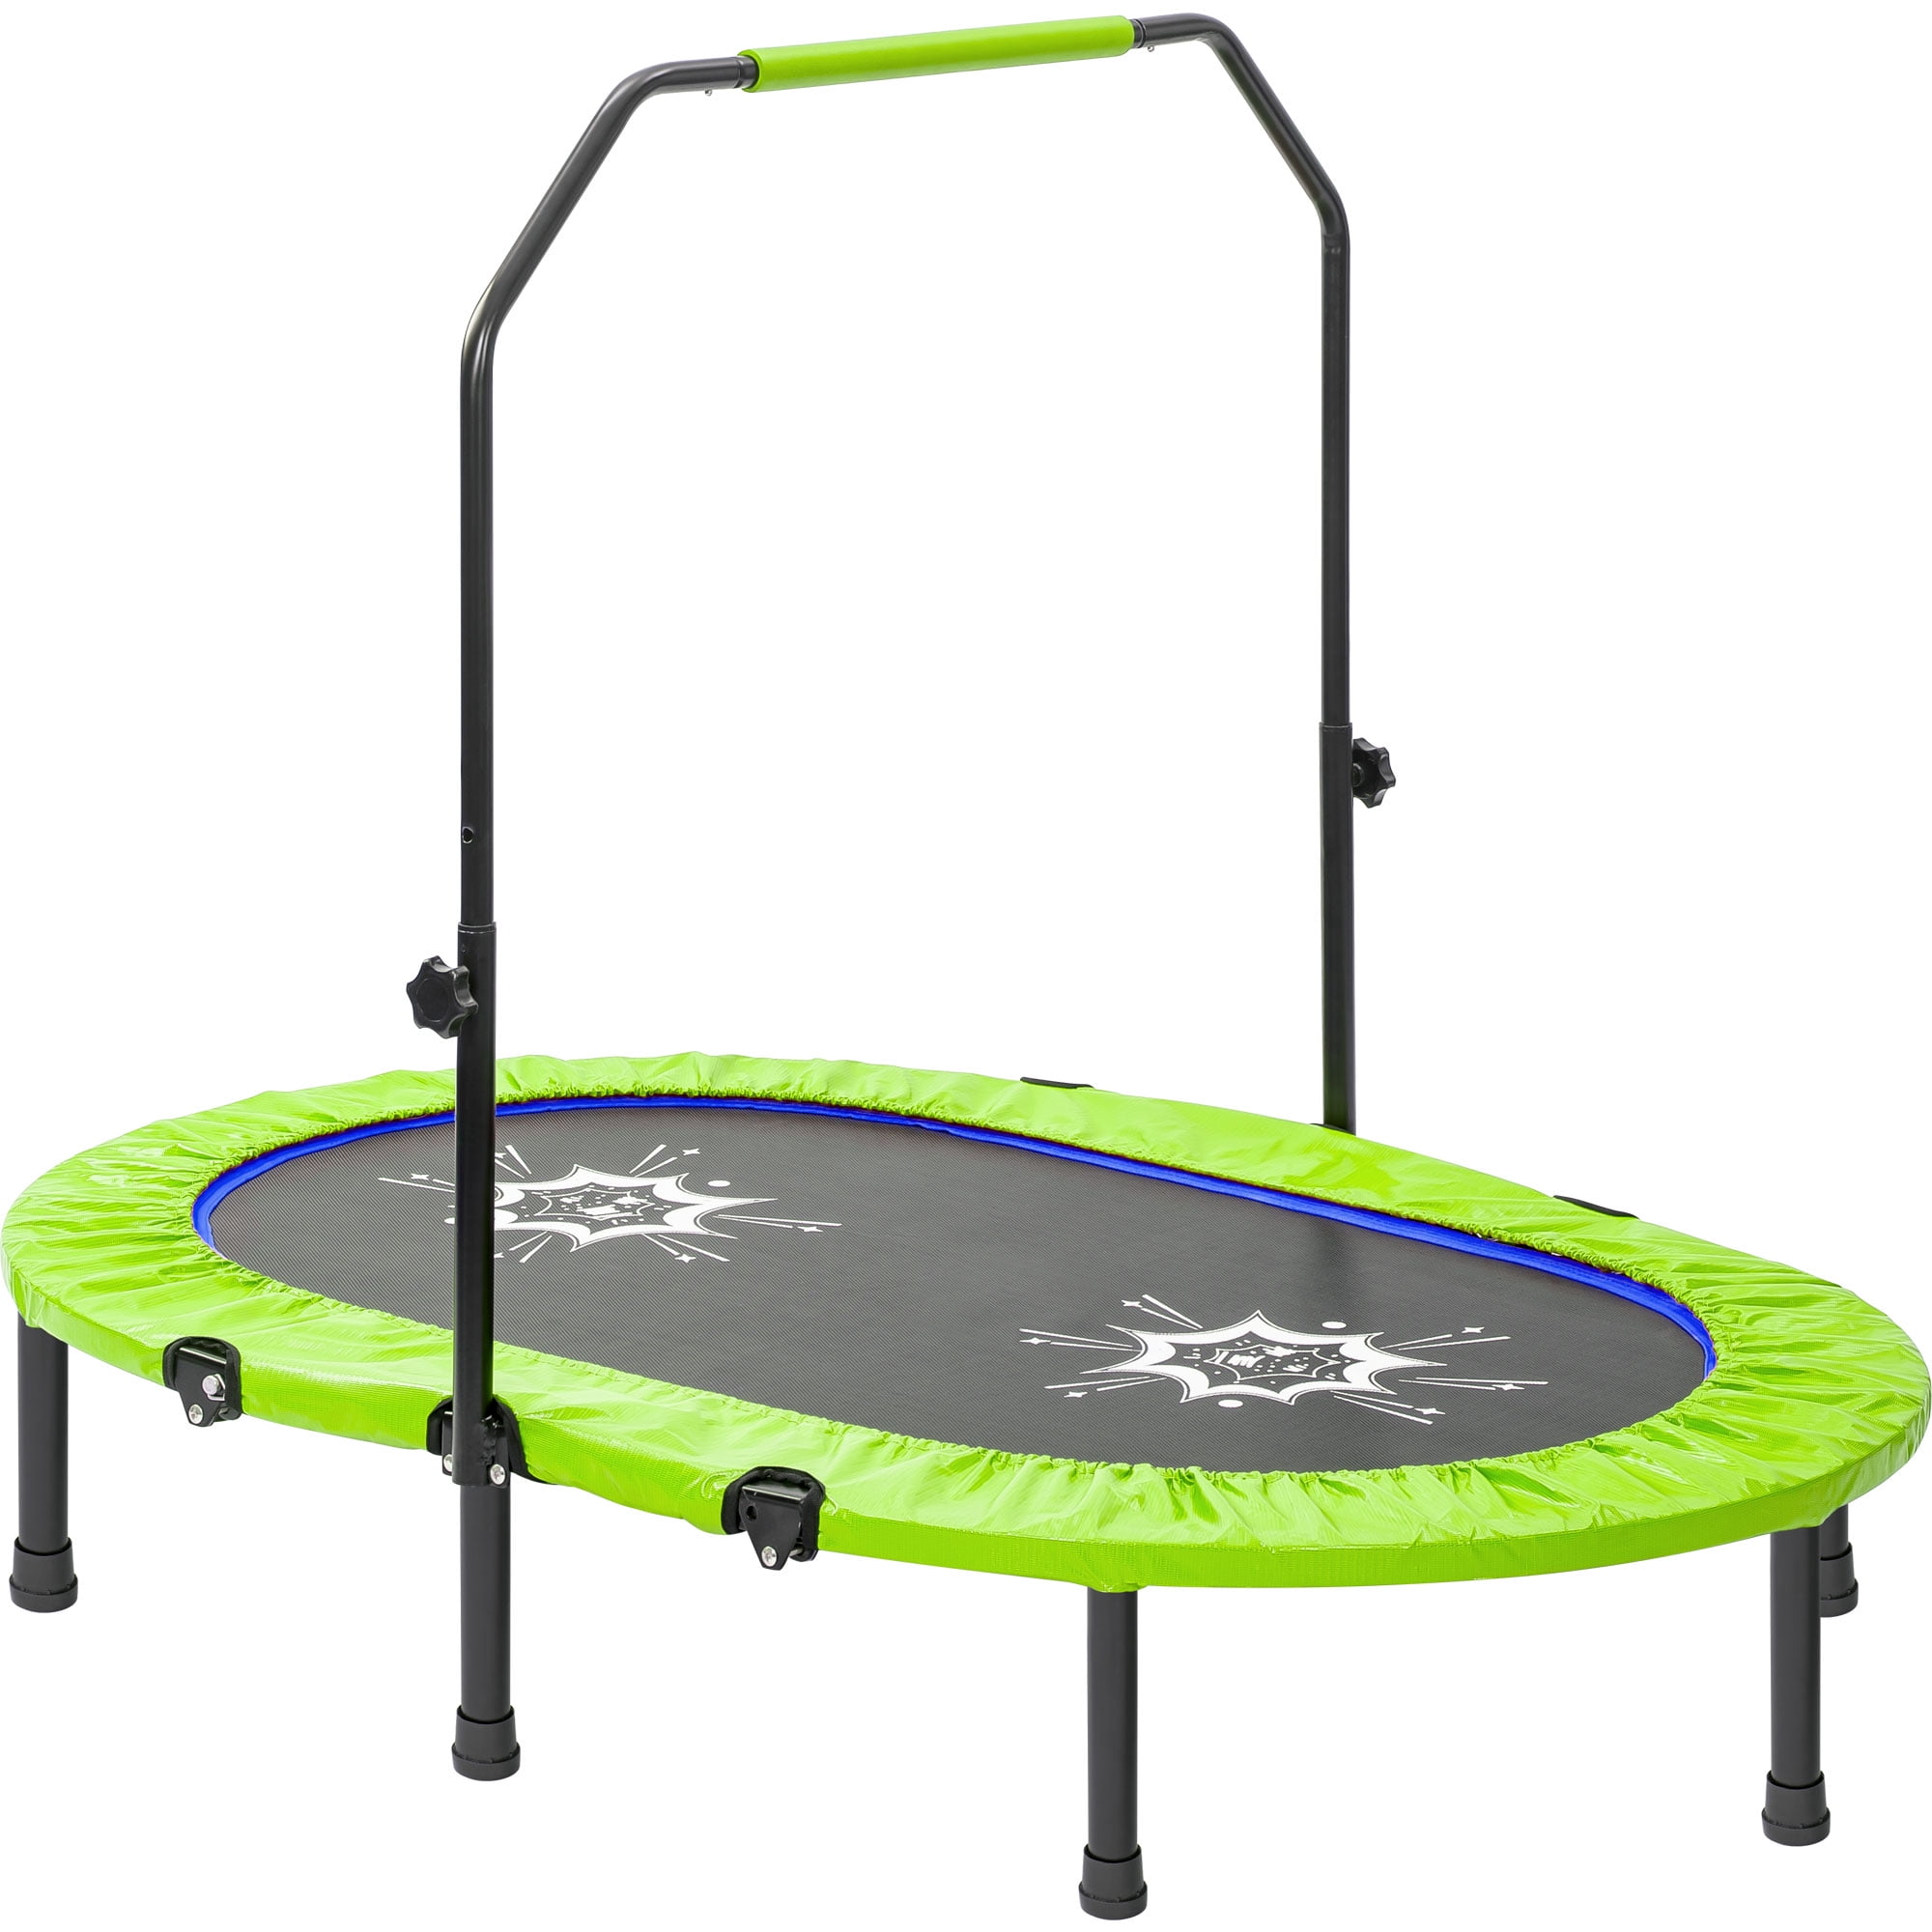 Twin Trampoline with Adjustable Handrail and Safety Cover, 55" Wide Mini Kids Trampoline for 2 Kids Parent-Child Trampoline Indoor and Outdoor Play